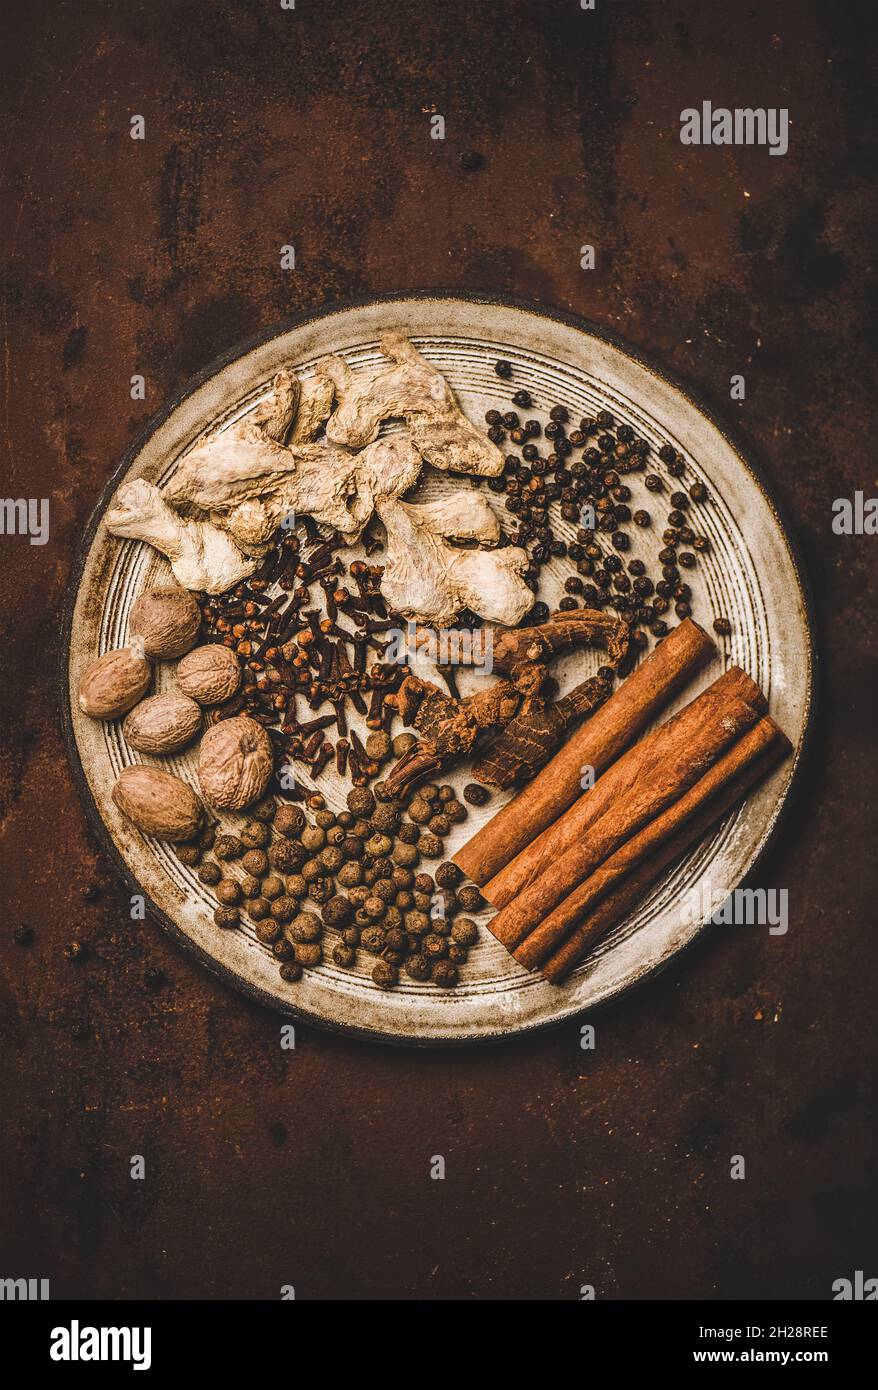 Turkish seven spice Yedi Bahar mix, top view Stock Photo